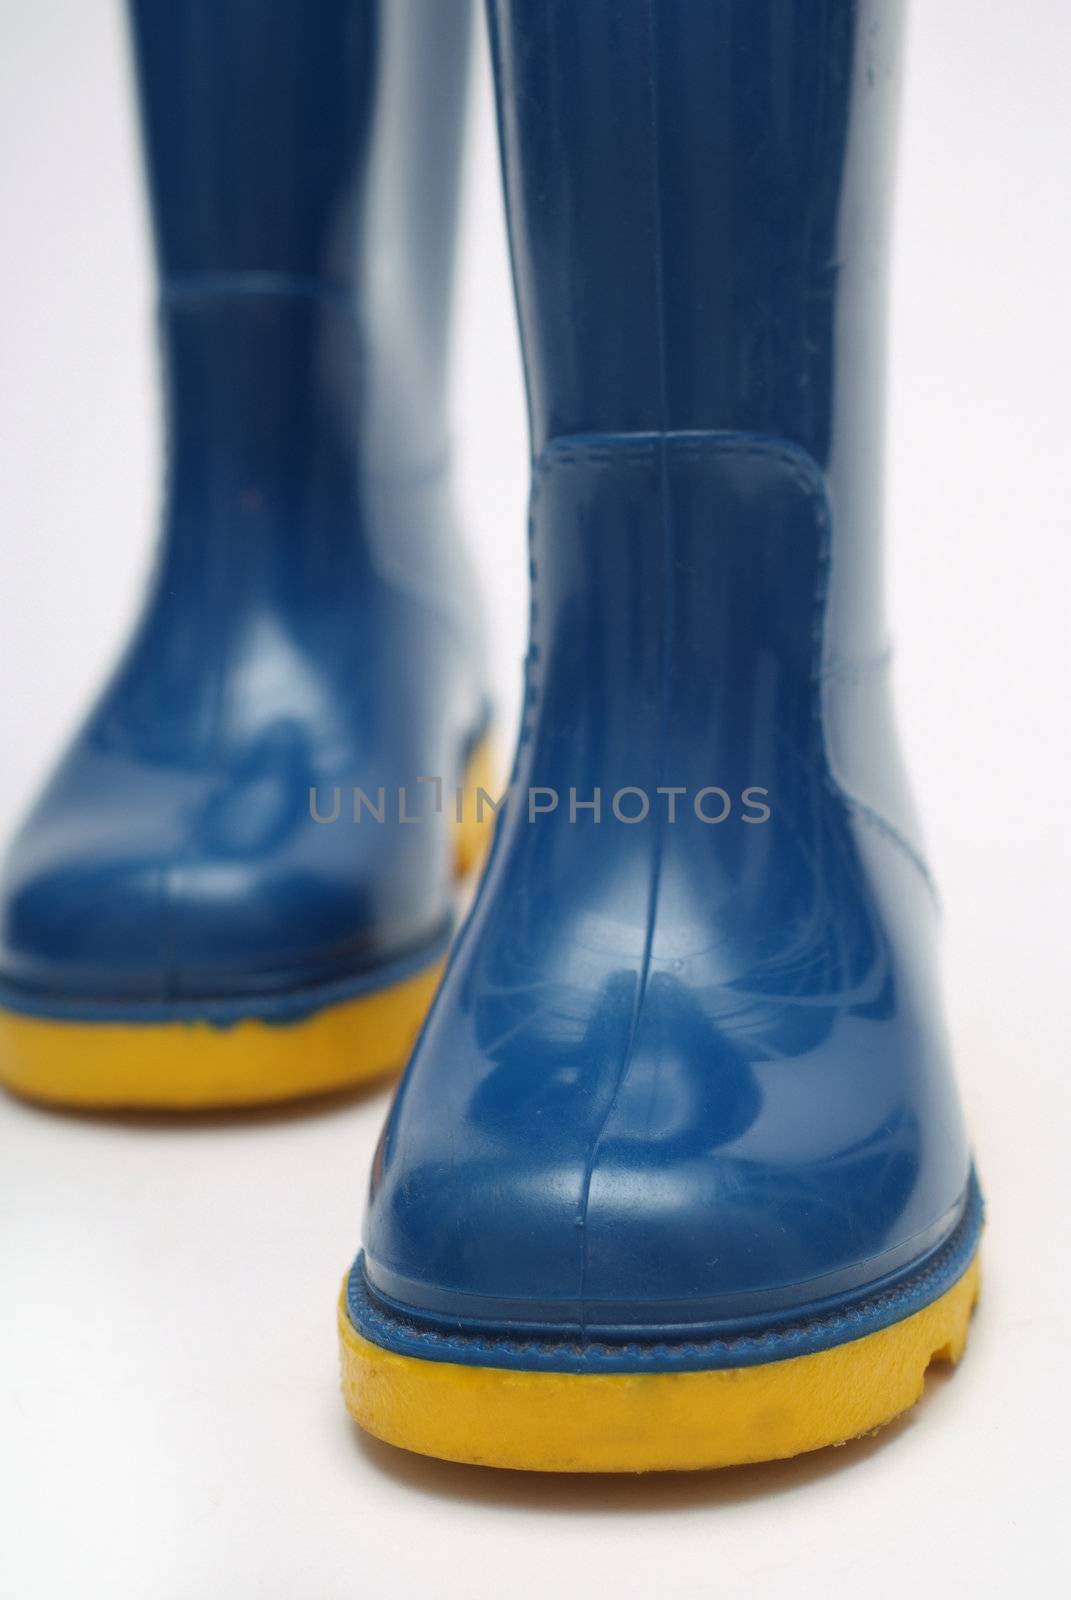 Childs rain boots by alistaircotton